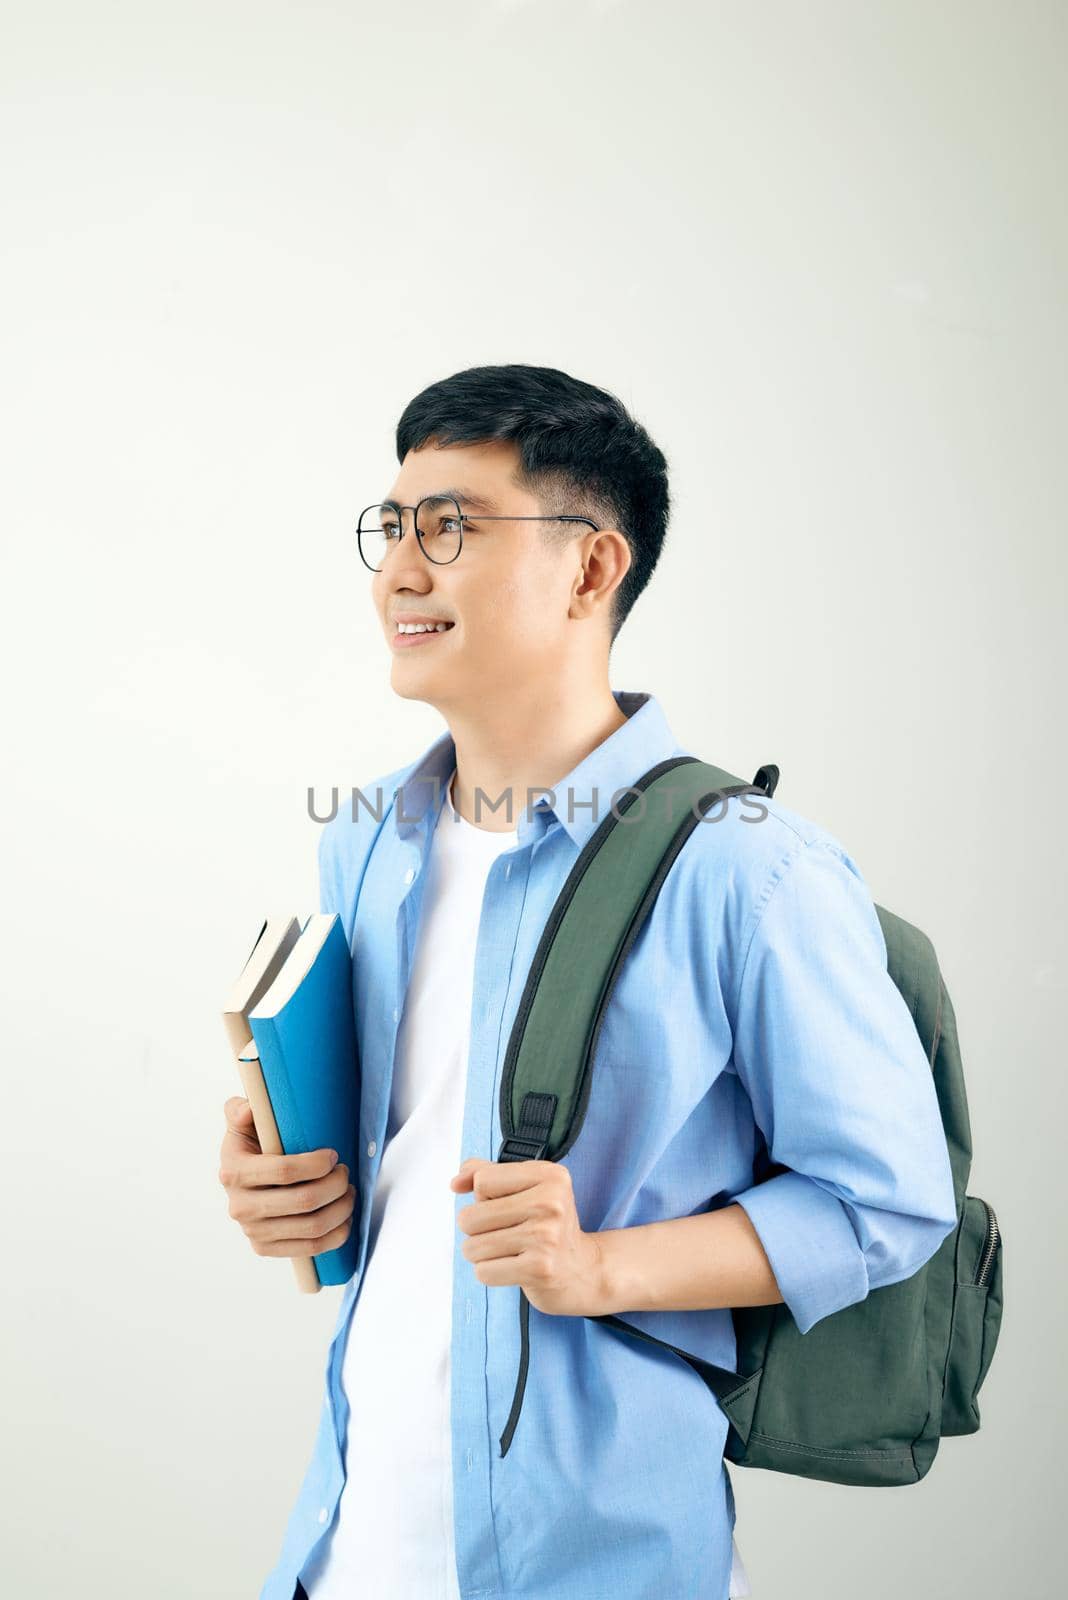 A smiling student carrying his backpack, isolated on a white background by makidotvn